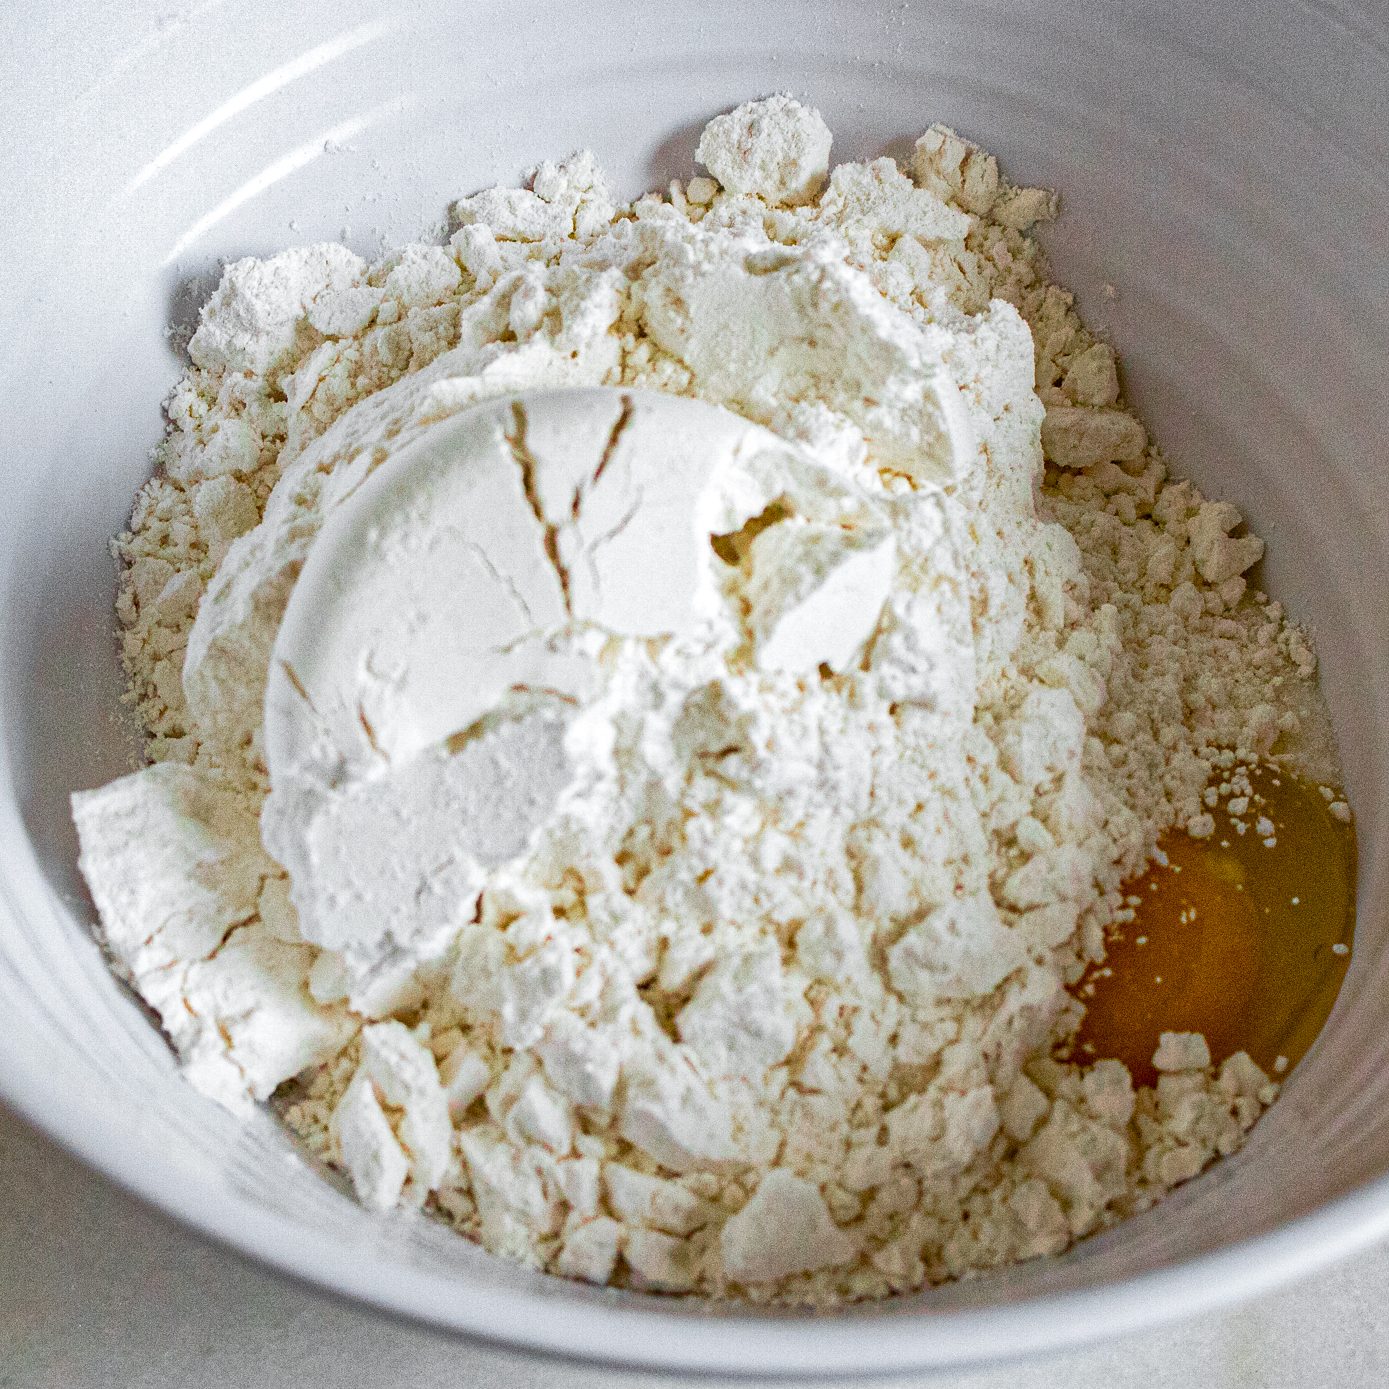 In a medium bowl, combine butter, sugar, egg, and flour. Stir with a spoon for a few moments until the mixture hangs together a bit. Then use hands to form the dough. Pat a bit more than 1/2 of the dough on the bottom and sides of the 9-inch pie dish.